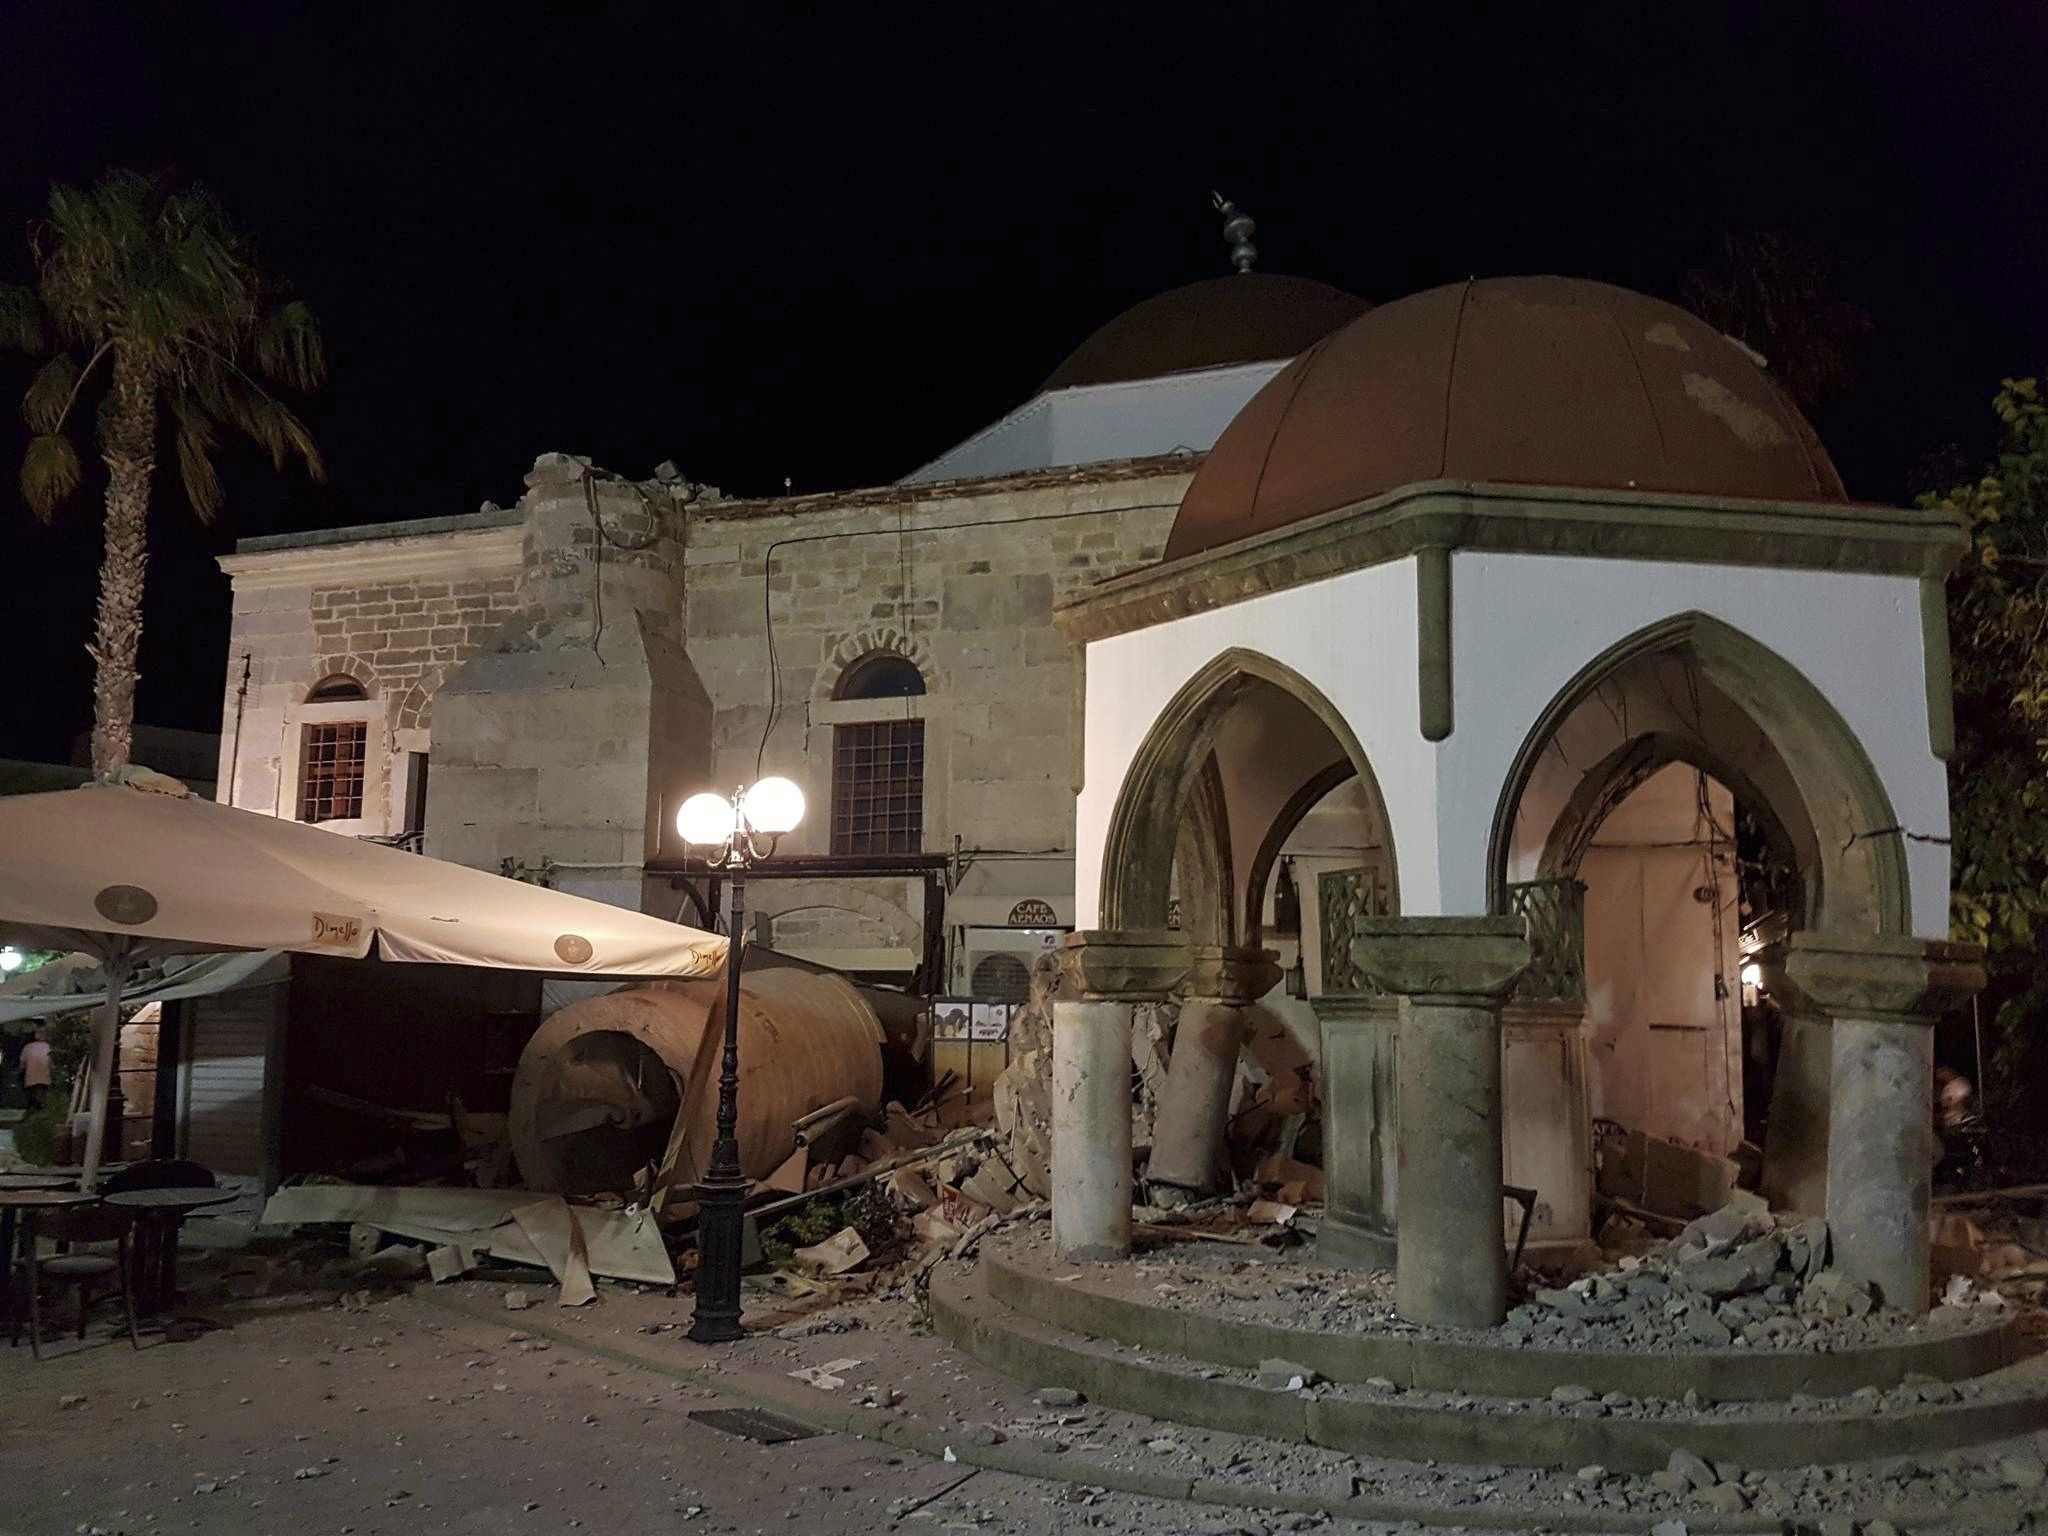 A damaged building is seen after an earthquake on the Greek island of Kos early Friday, July 21, 2017. A powerful earthquake struck Greek islands and Turkey's Aegean coast early Friday morning, damaging buildings and a port and killing people, authorities said. (Kalymnos-news.gr via AP)